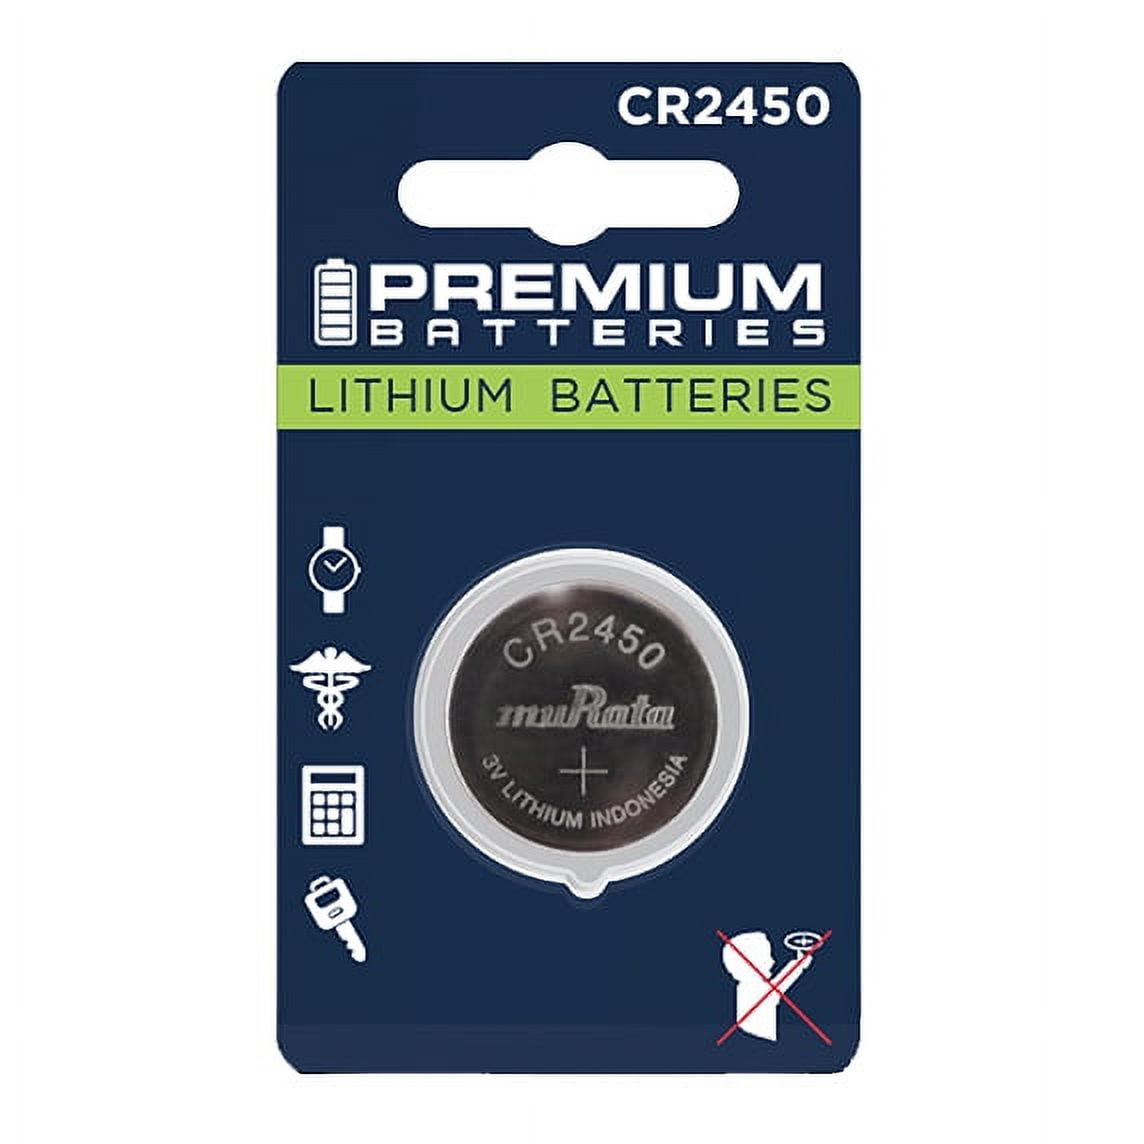 CR2450 Battery 3v Lithium Coin Cell Batteries - High Capacity